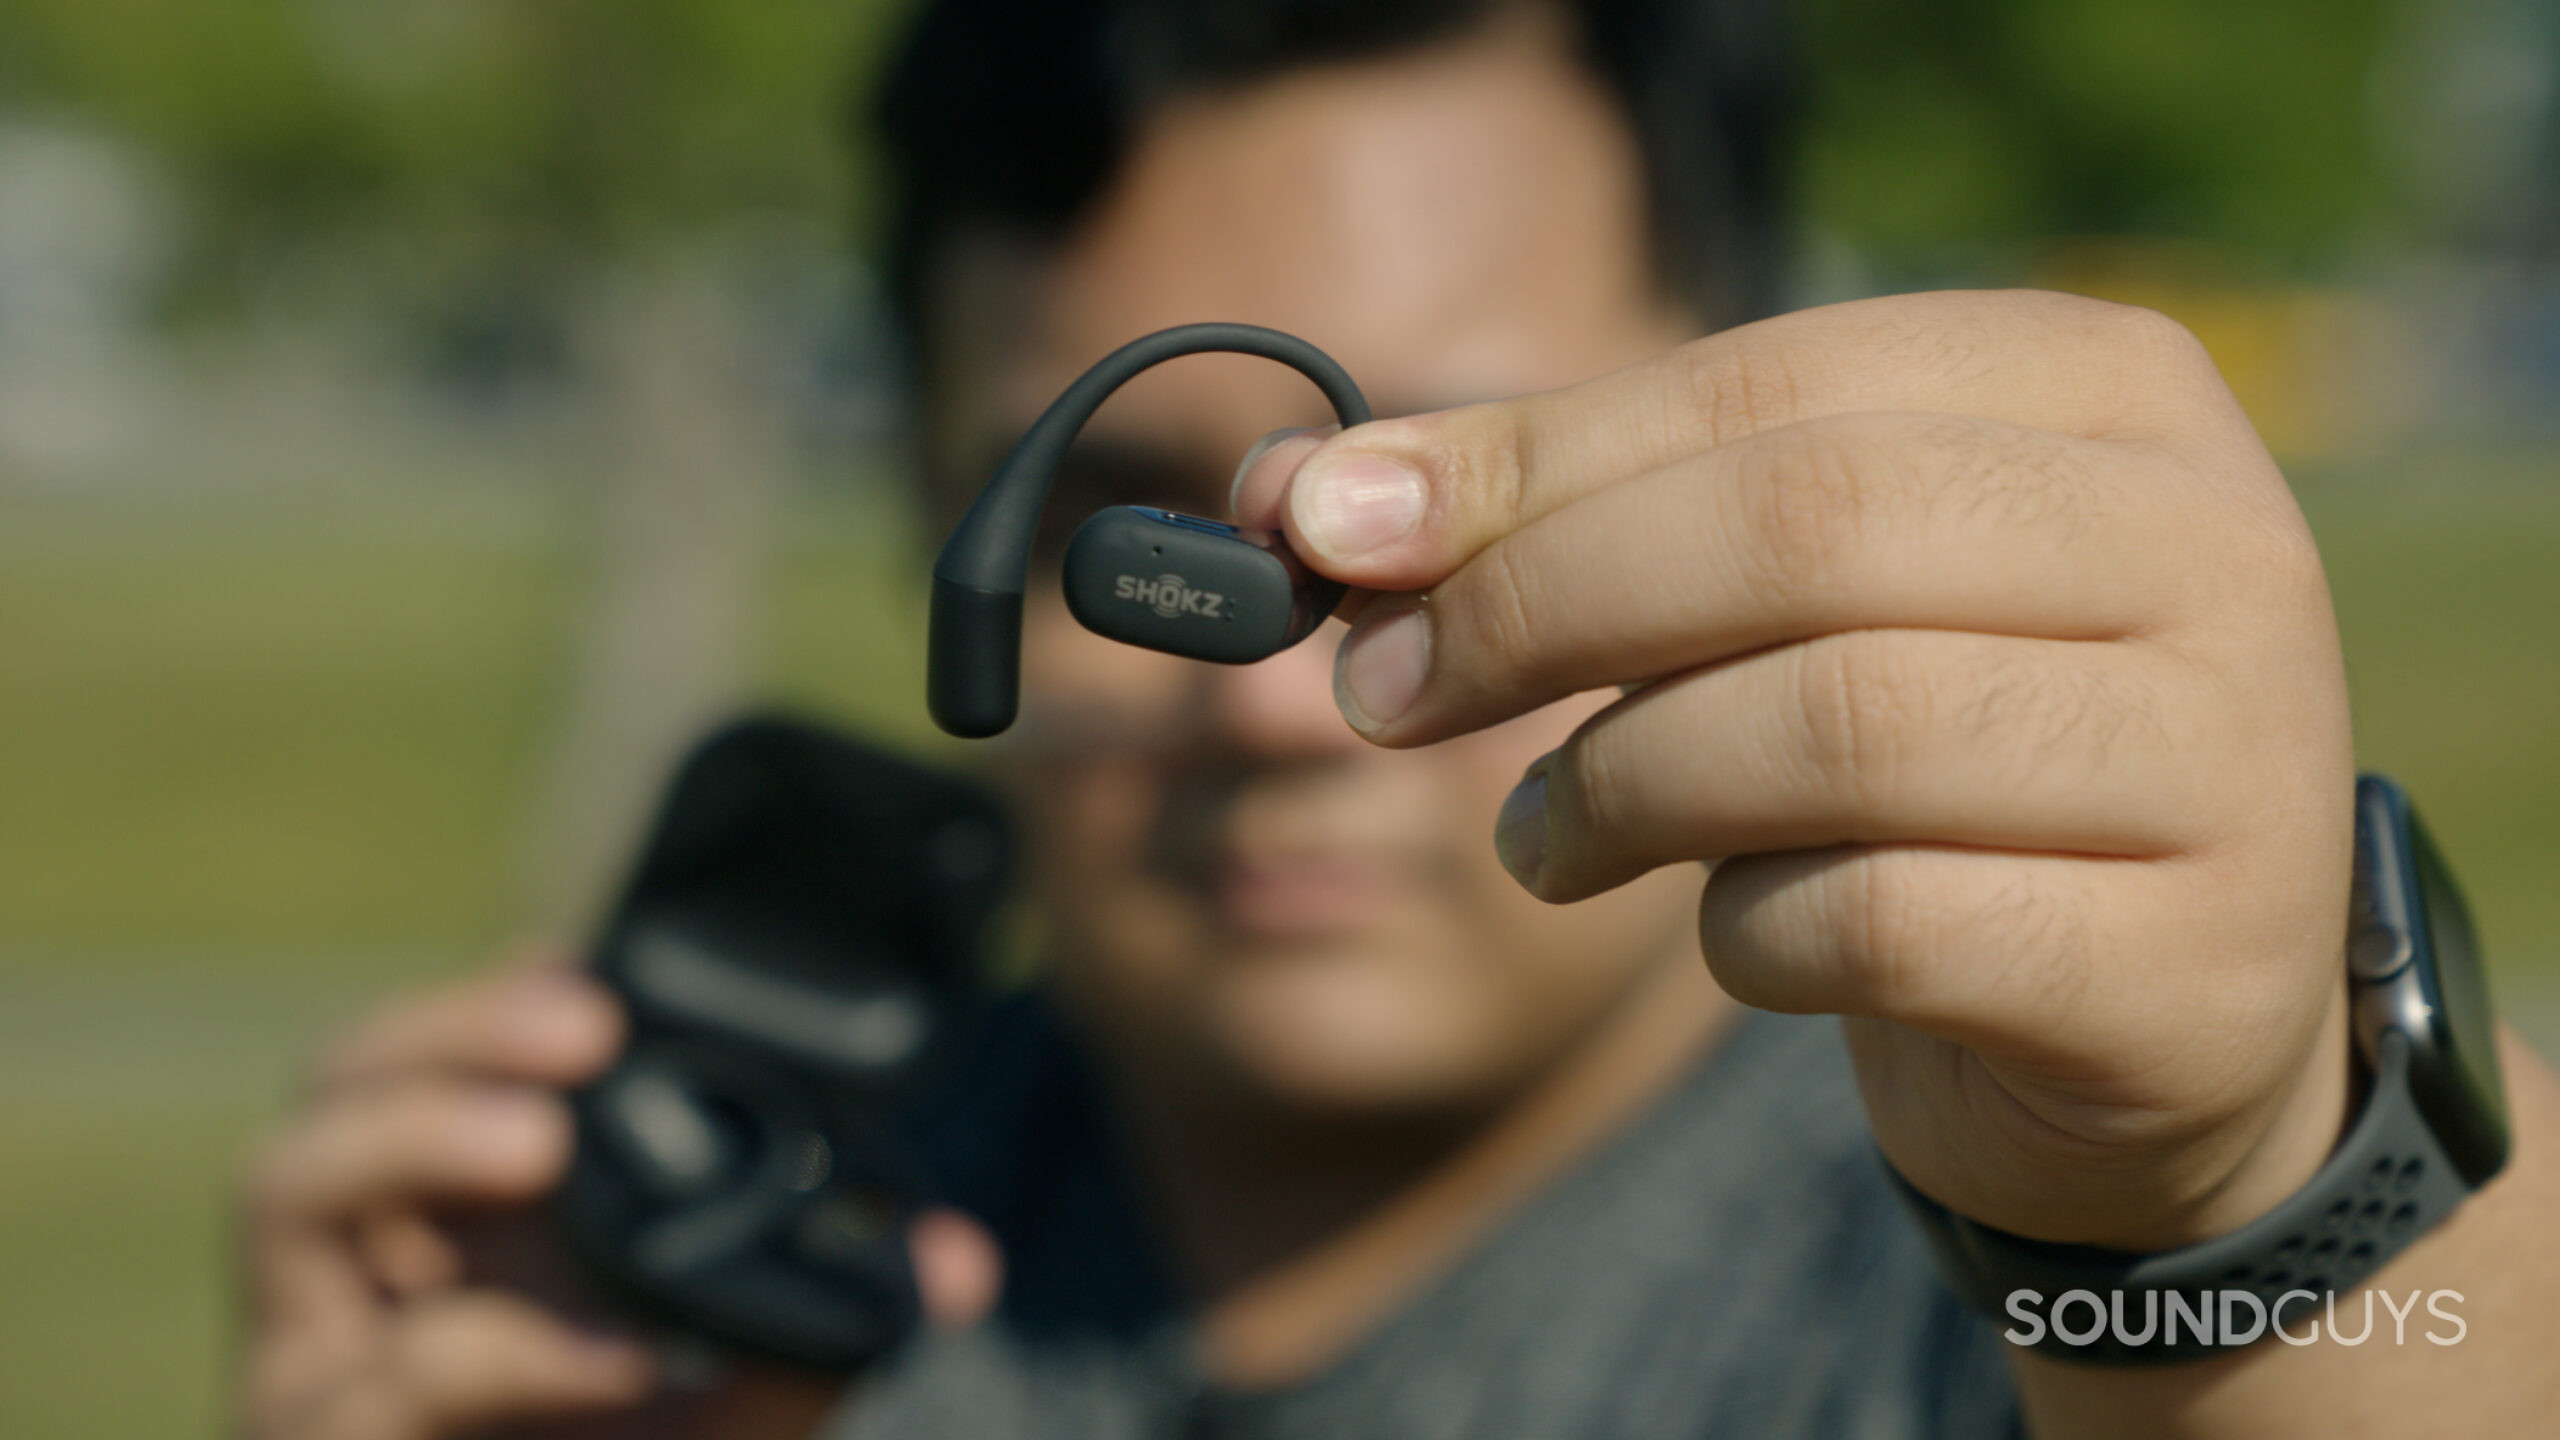 Huawei FreeClip Review: Shokz OpenFit rivals put to the running